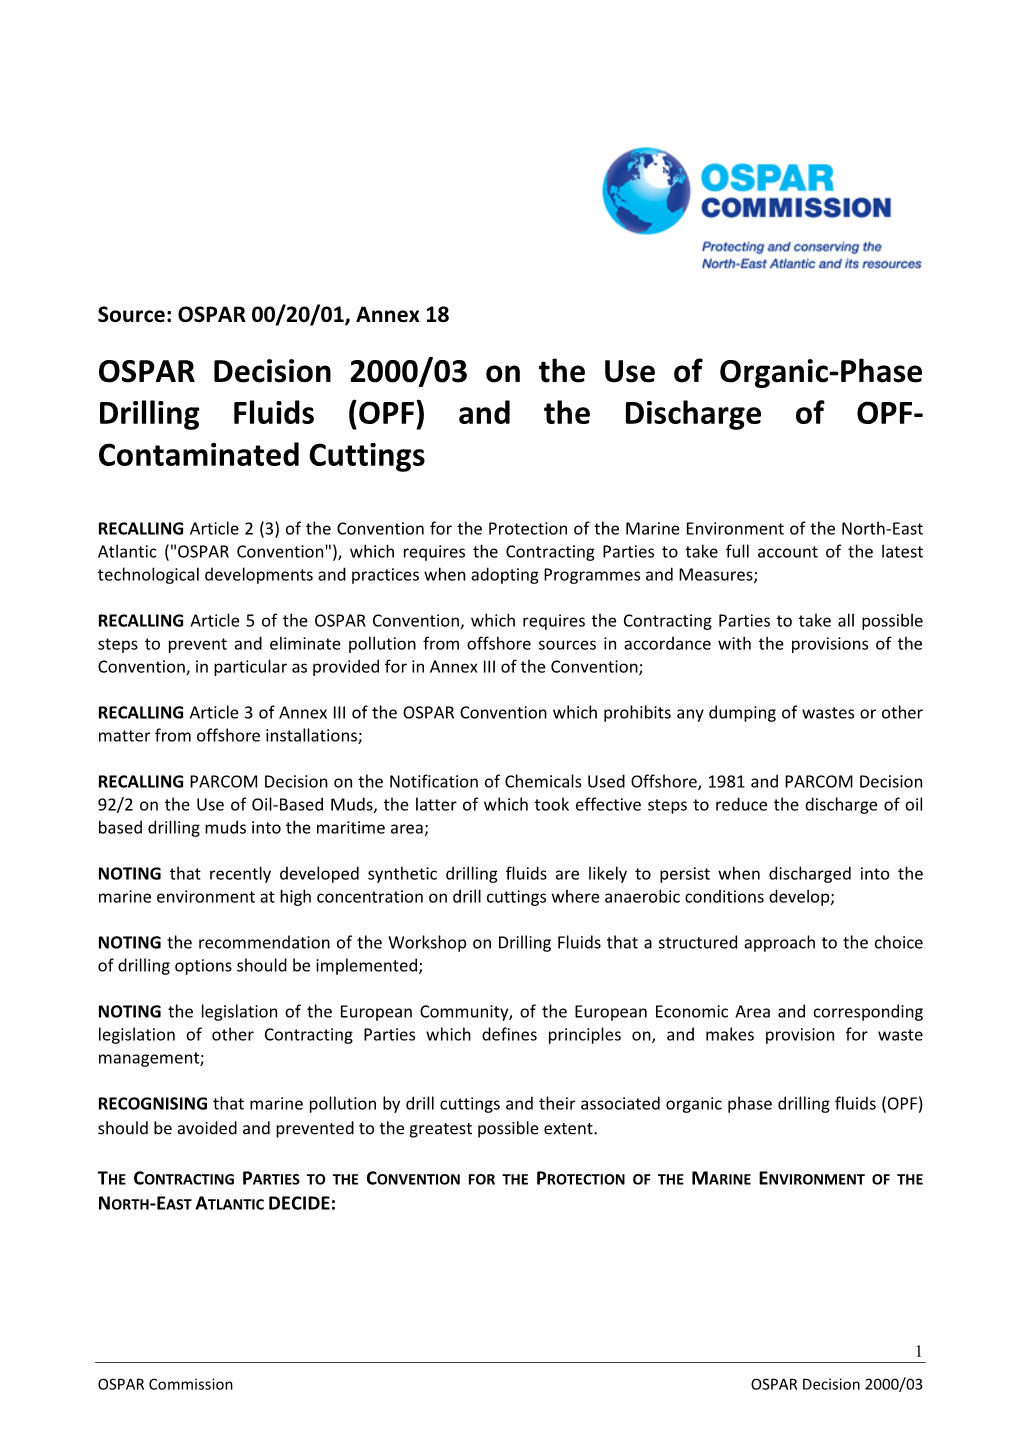 OSPAR Decision 2000/03 on the Use of Organic-Phase Drilling Fluids (OPF) and the Discharge of OPF- Contaminated Cuttings